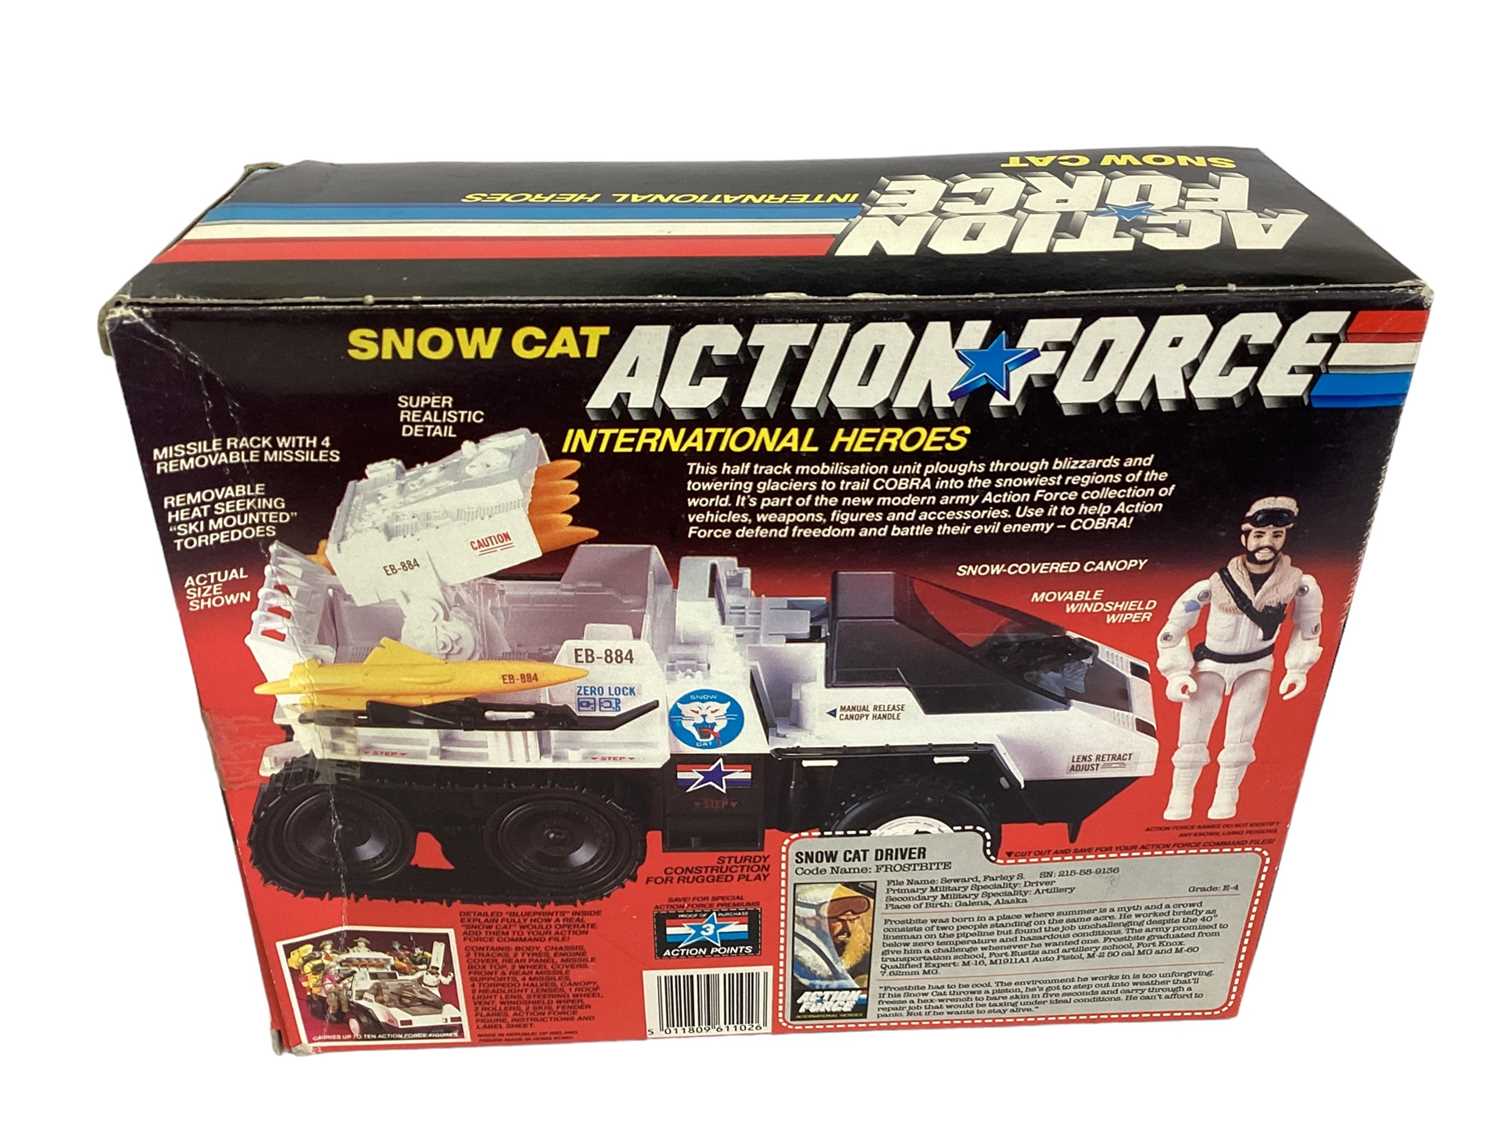 Hasbro (c1986) Action Force Snow Cat with Frostbite Driver, sellotaped box No.6057 (1) - Image 3 of 3